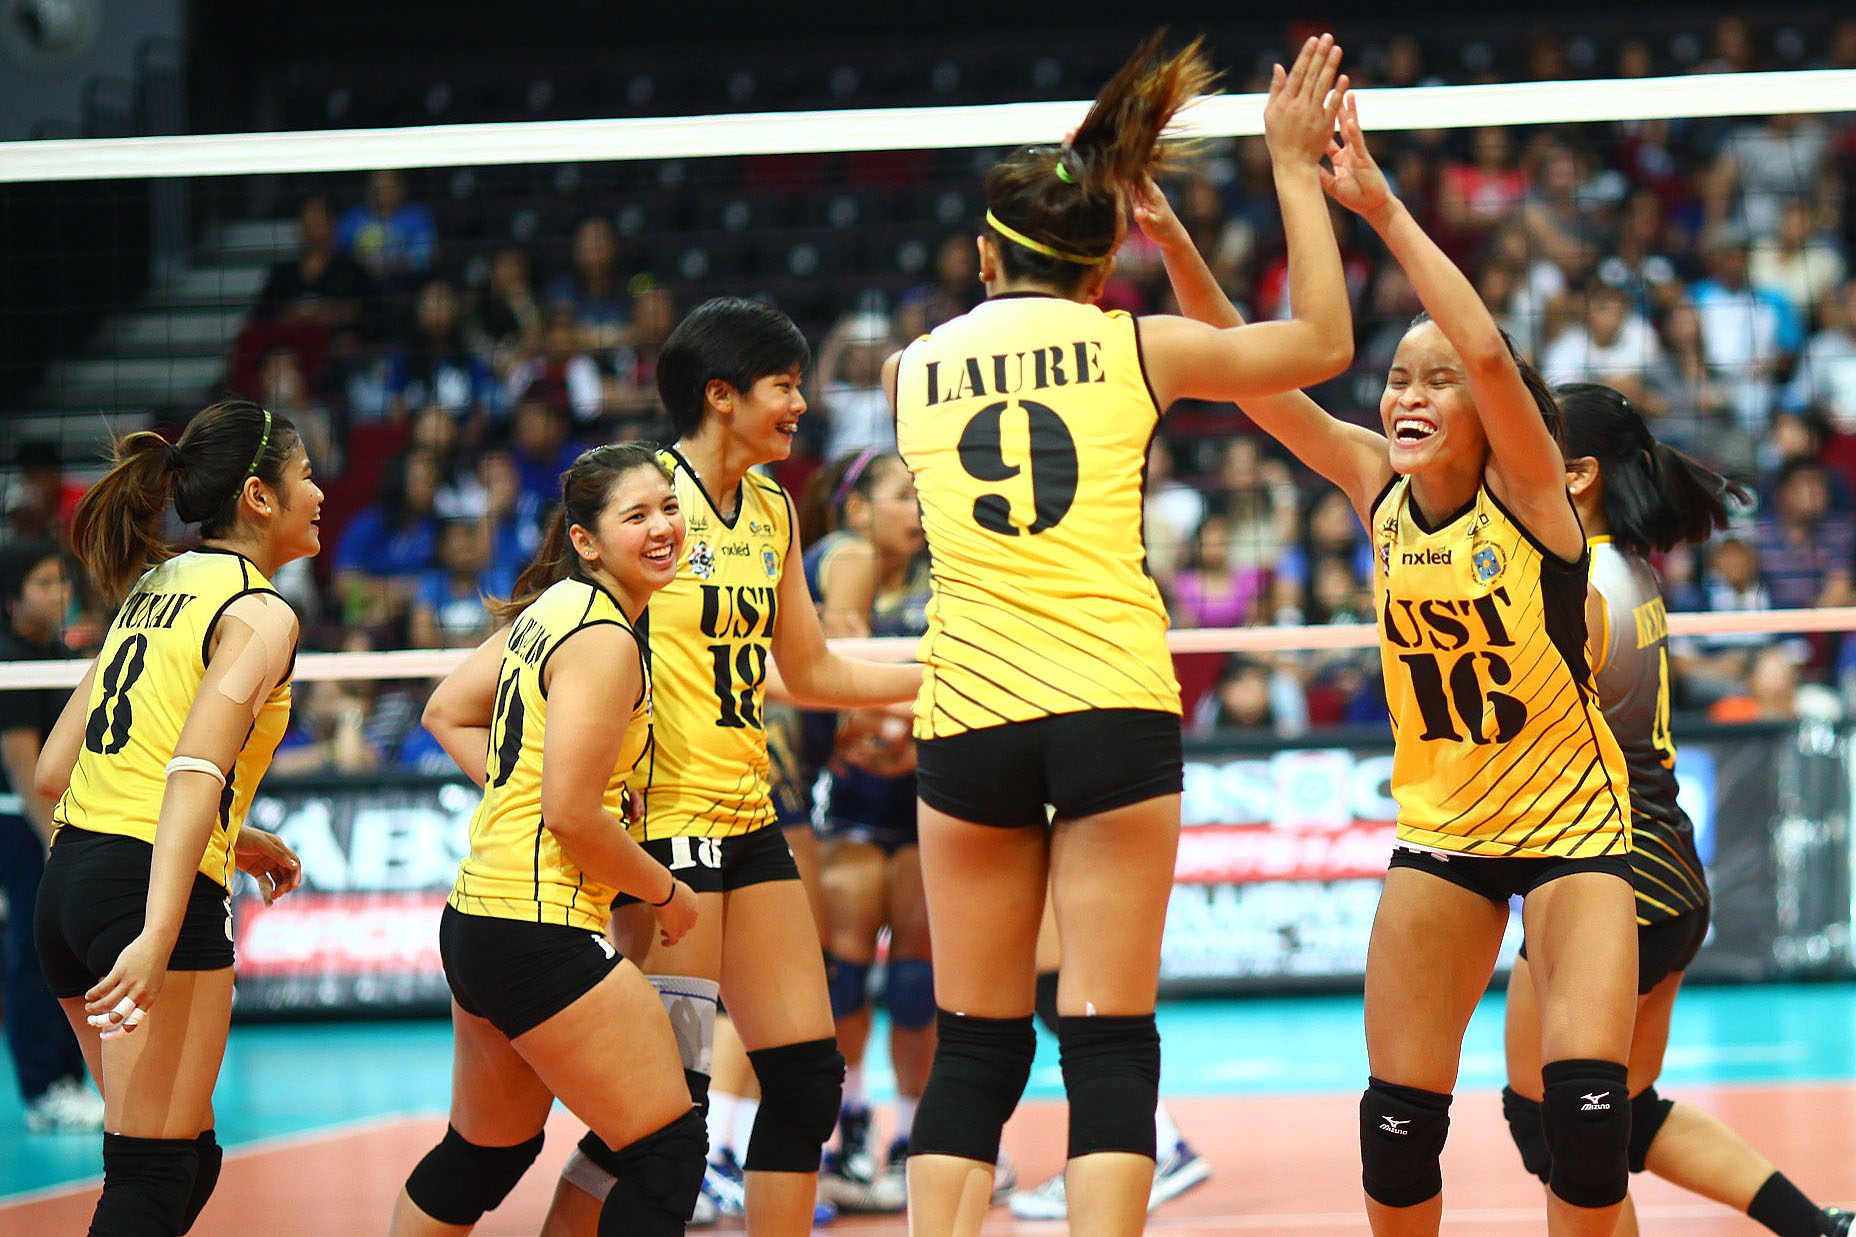 Rondina sparks late rally as UST stuns NU in 5 sets